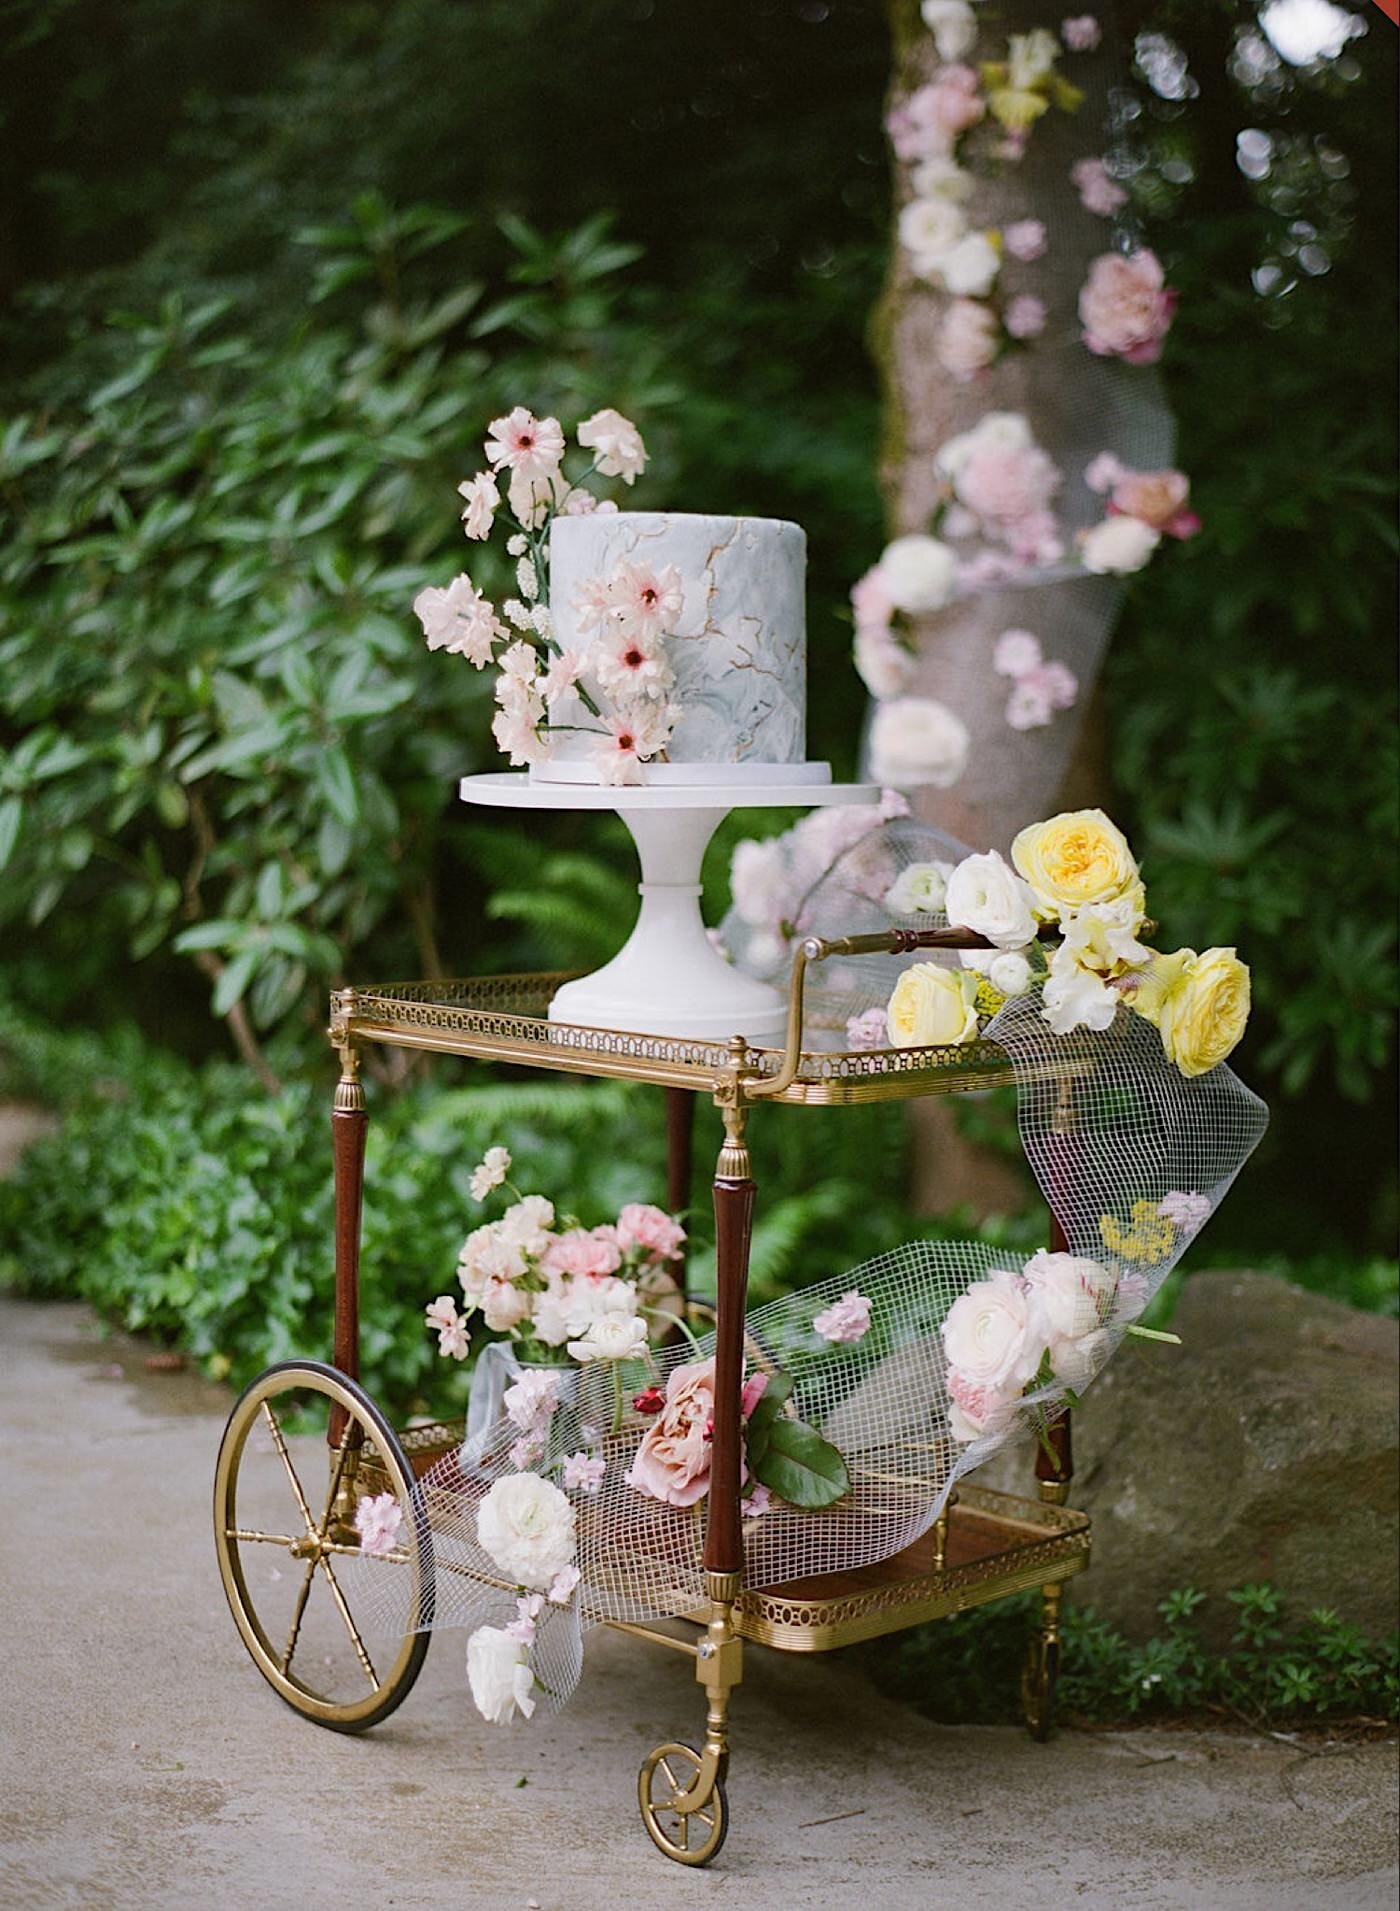 Lush cake display with cascading floral installation